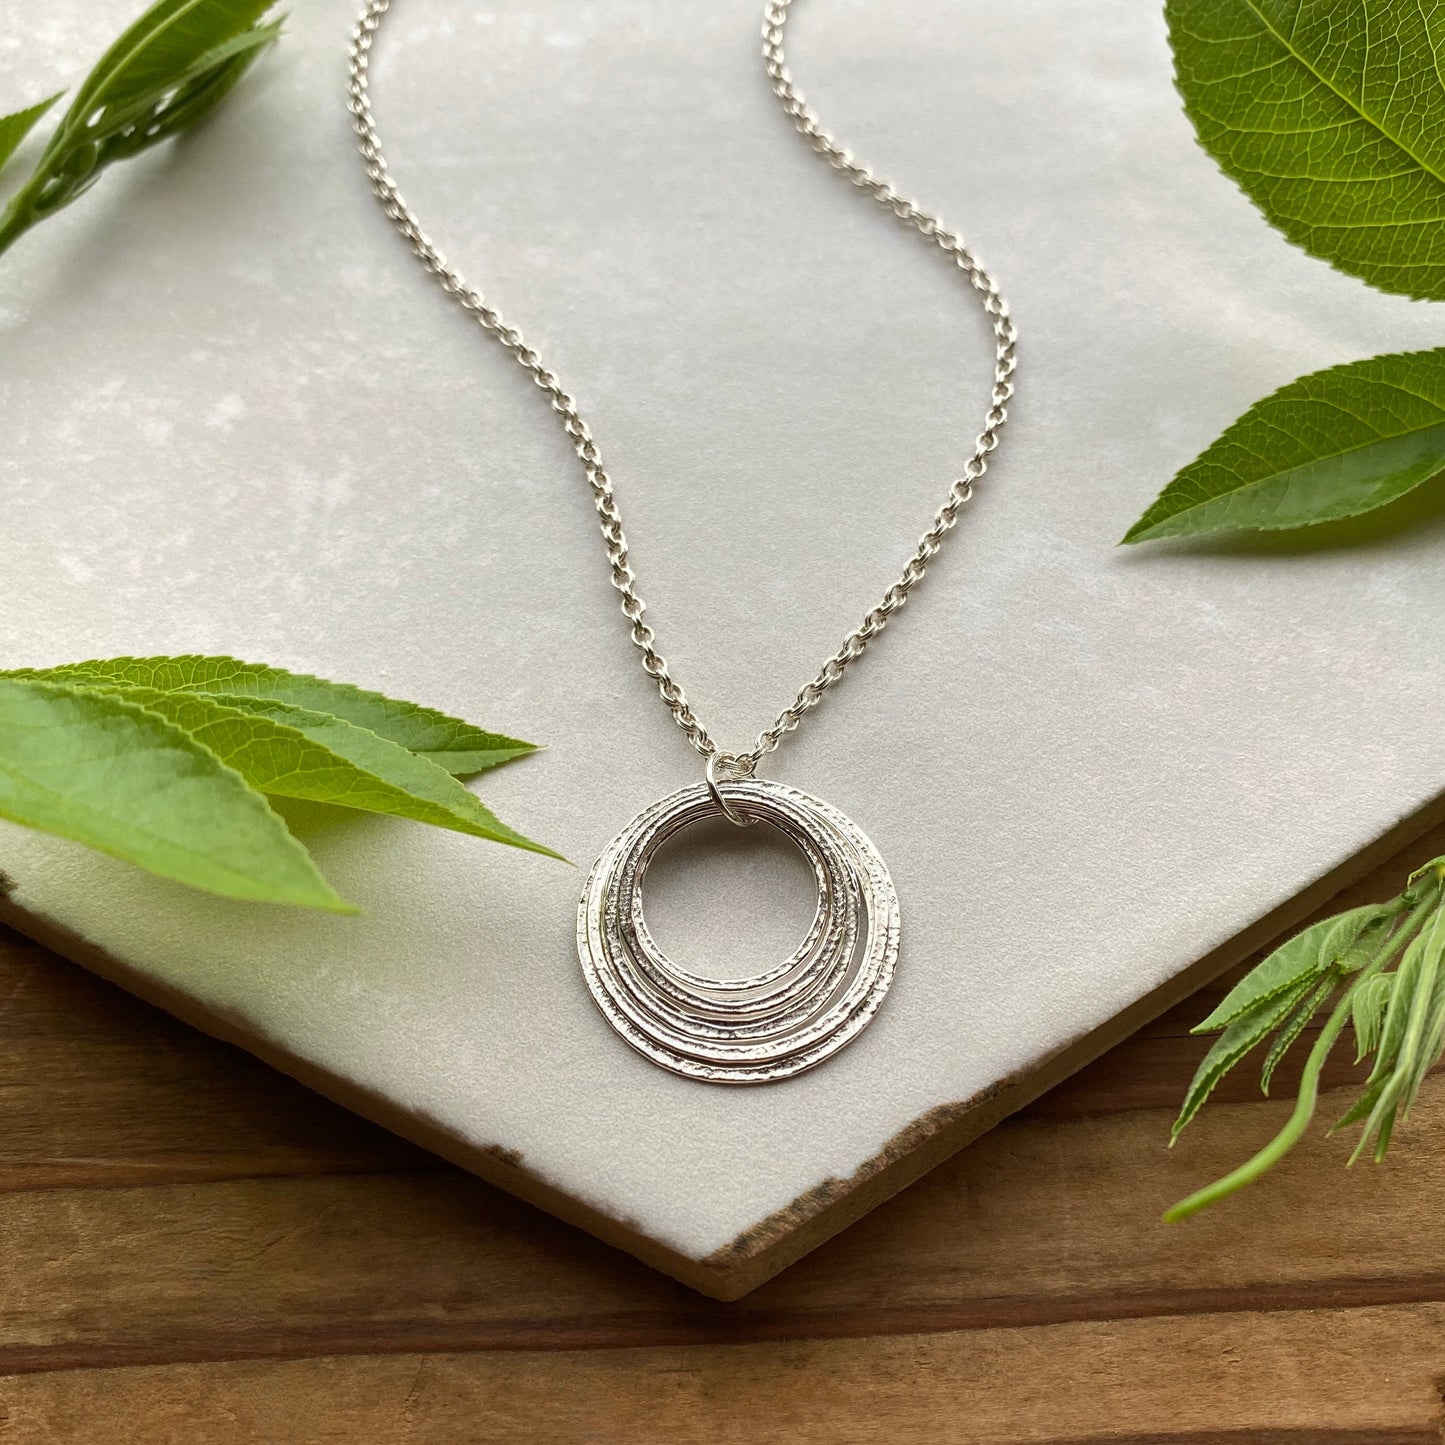 8 Circle 80th Minimalist Milestone Birthday Necklace, Sterling Silver 8 Rings Eight Decades Handcrafted Perfectly Imperfect Circle Pendant